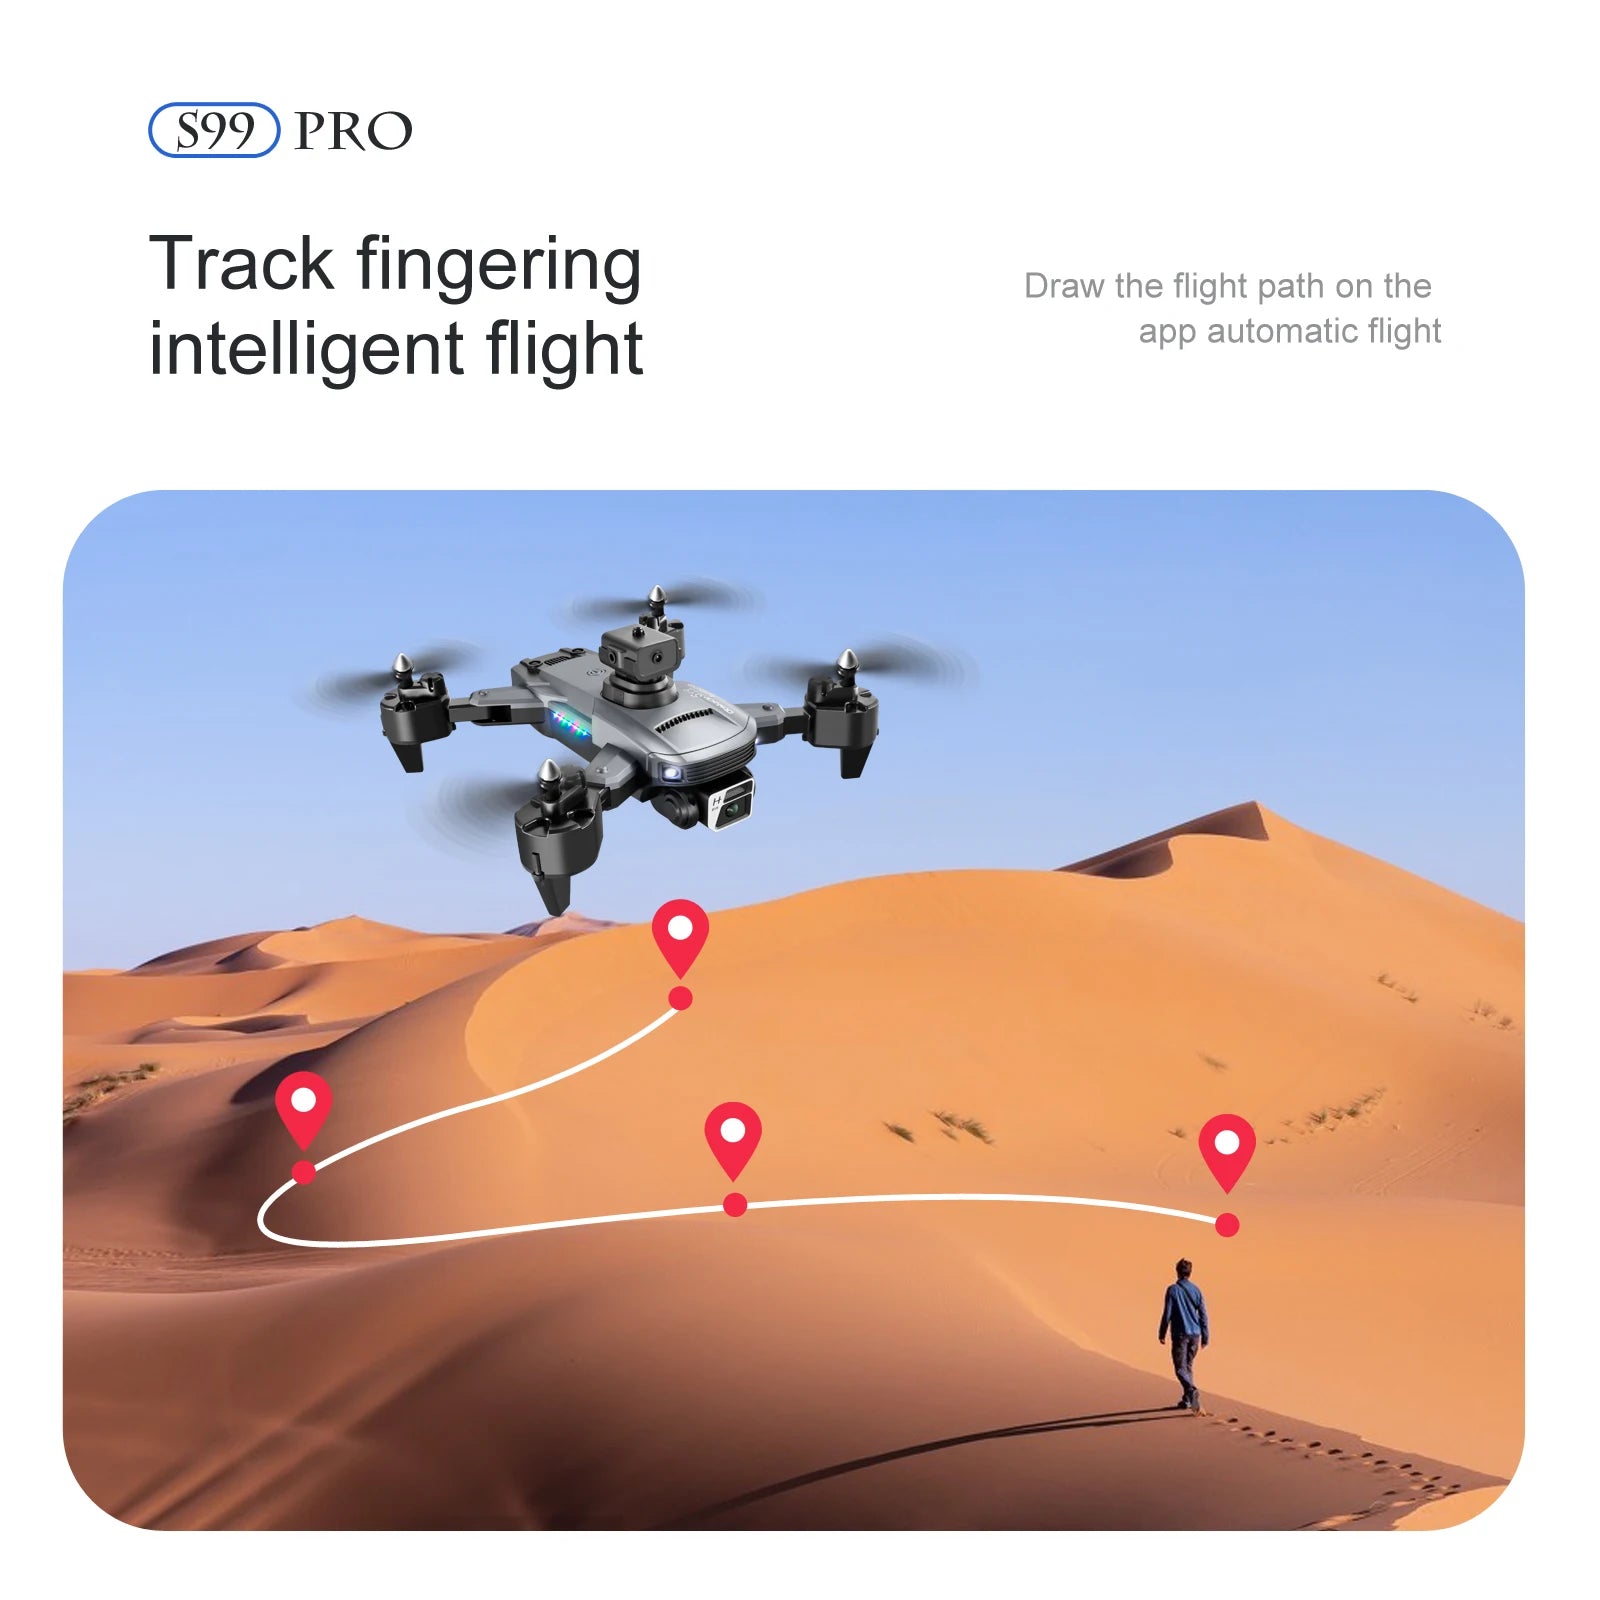 S99 Drone, s99 pro track fingering draw the flight on the app automatic